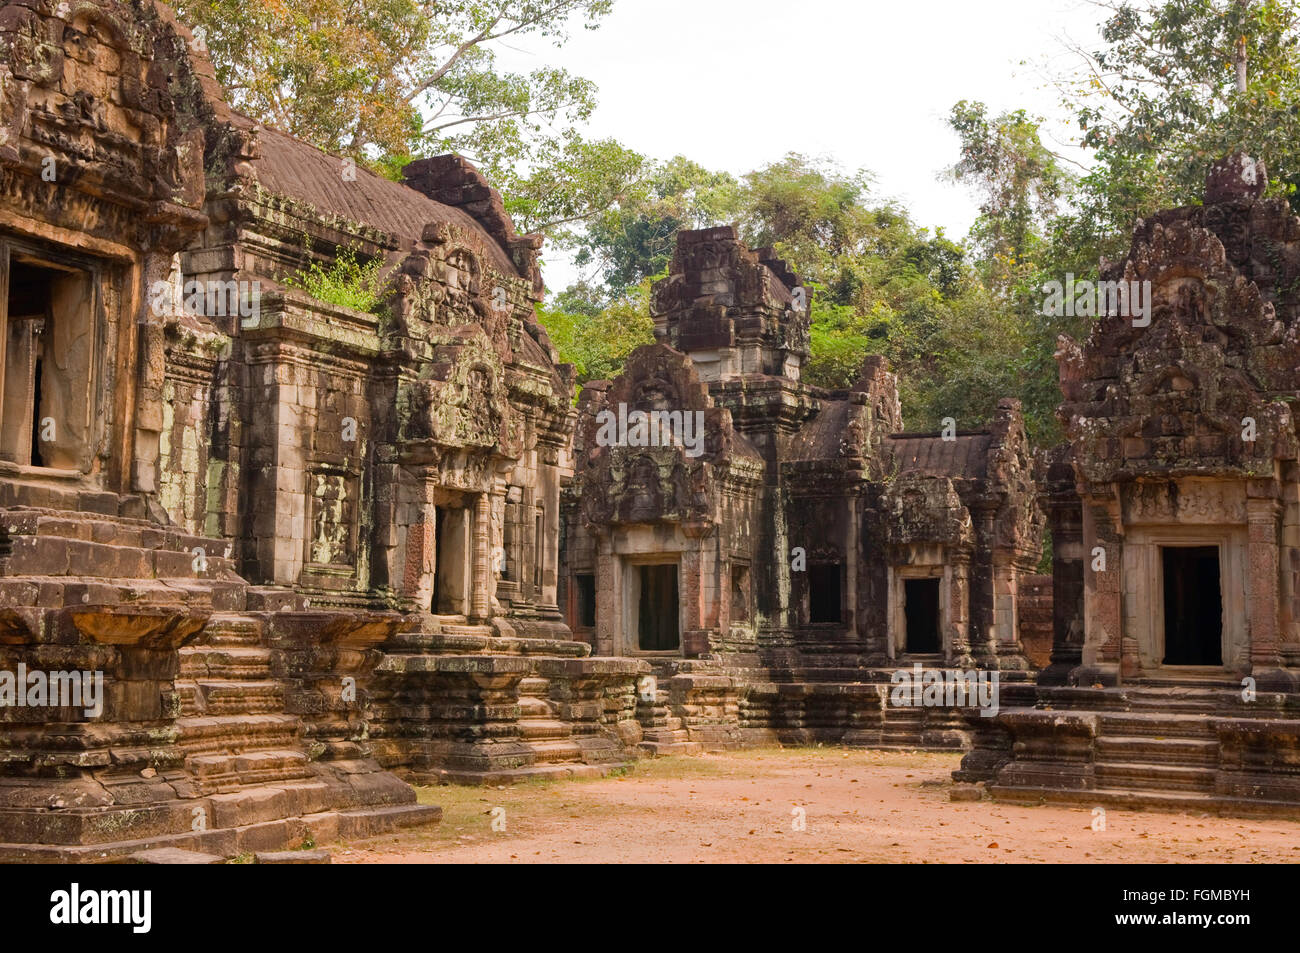 The ruins of Thommanom temple in Siem Reap, Cambodia Stock Photo